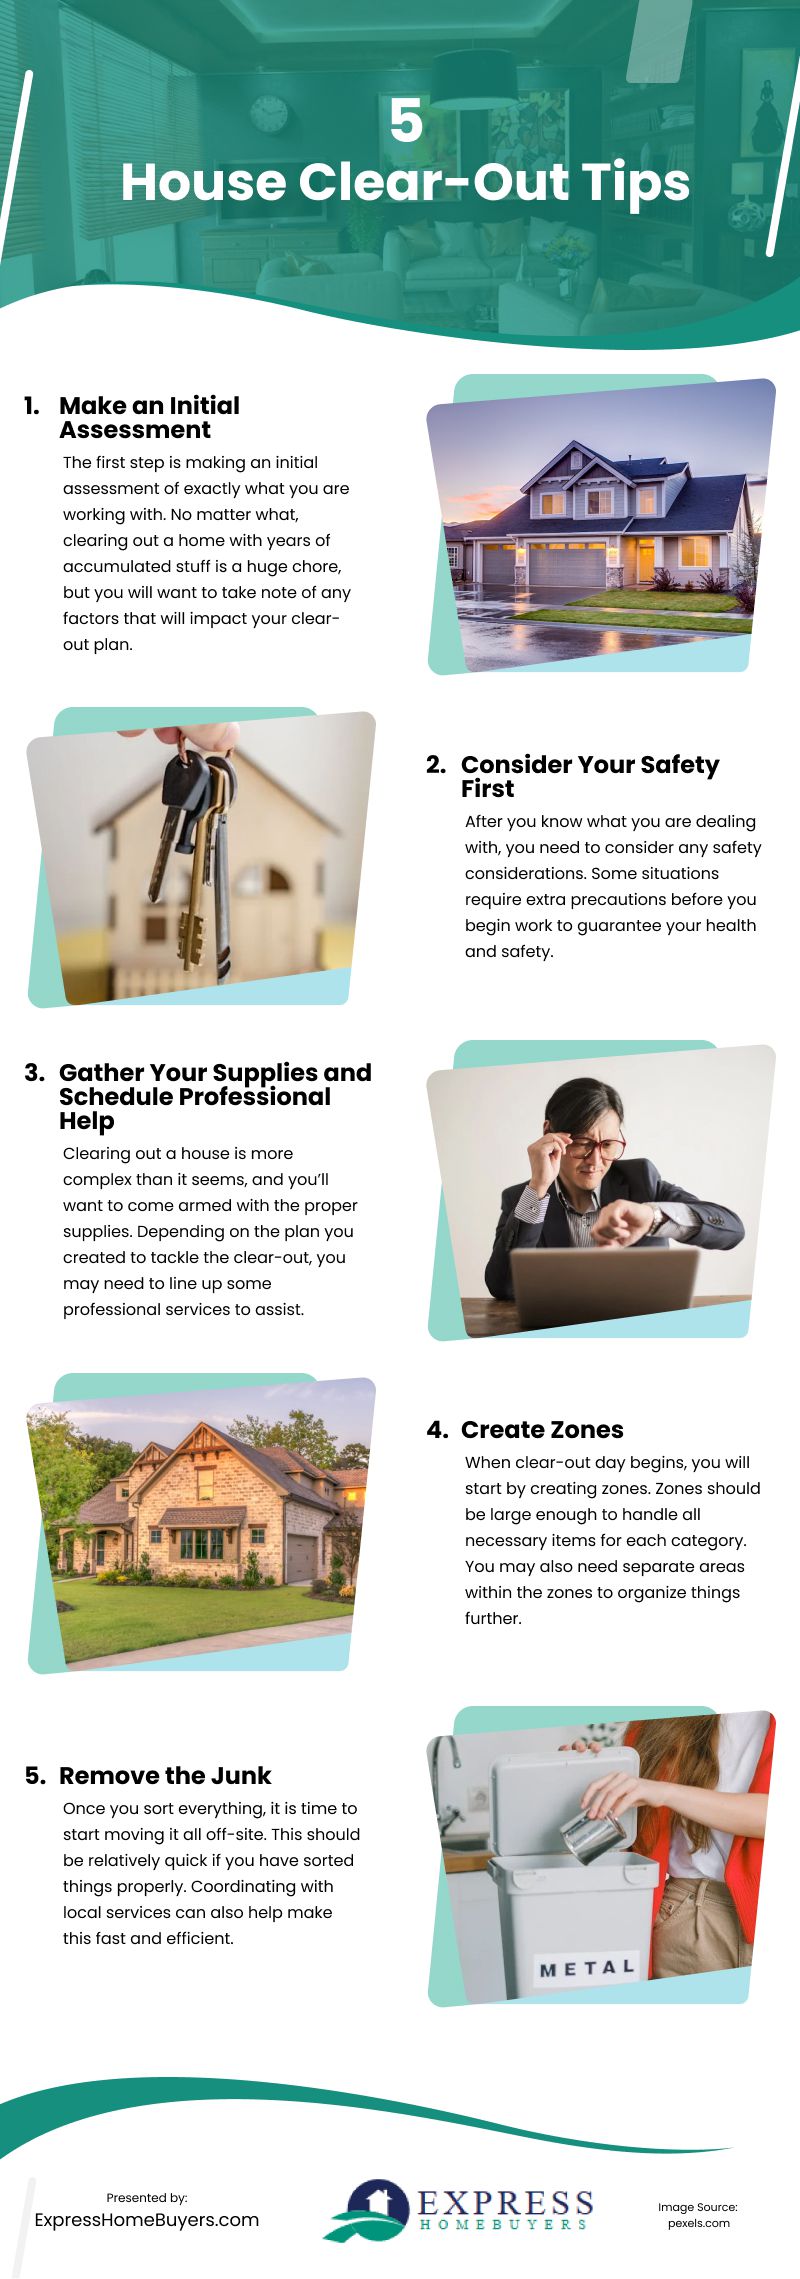 5 House Clear-Out Tips Infographic